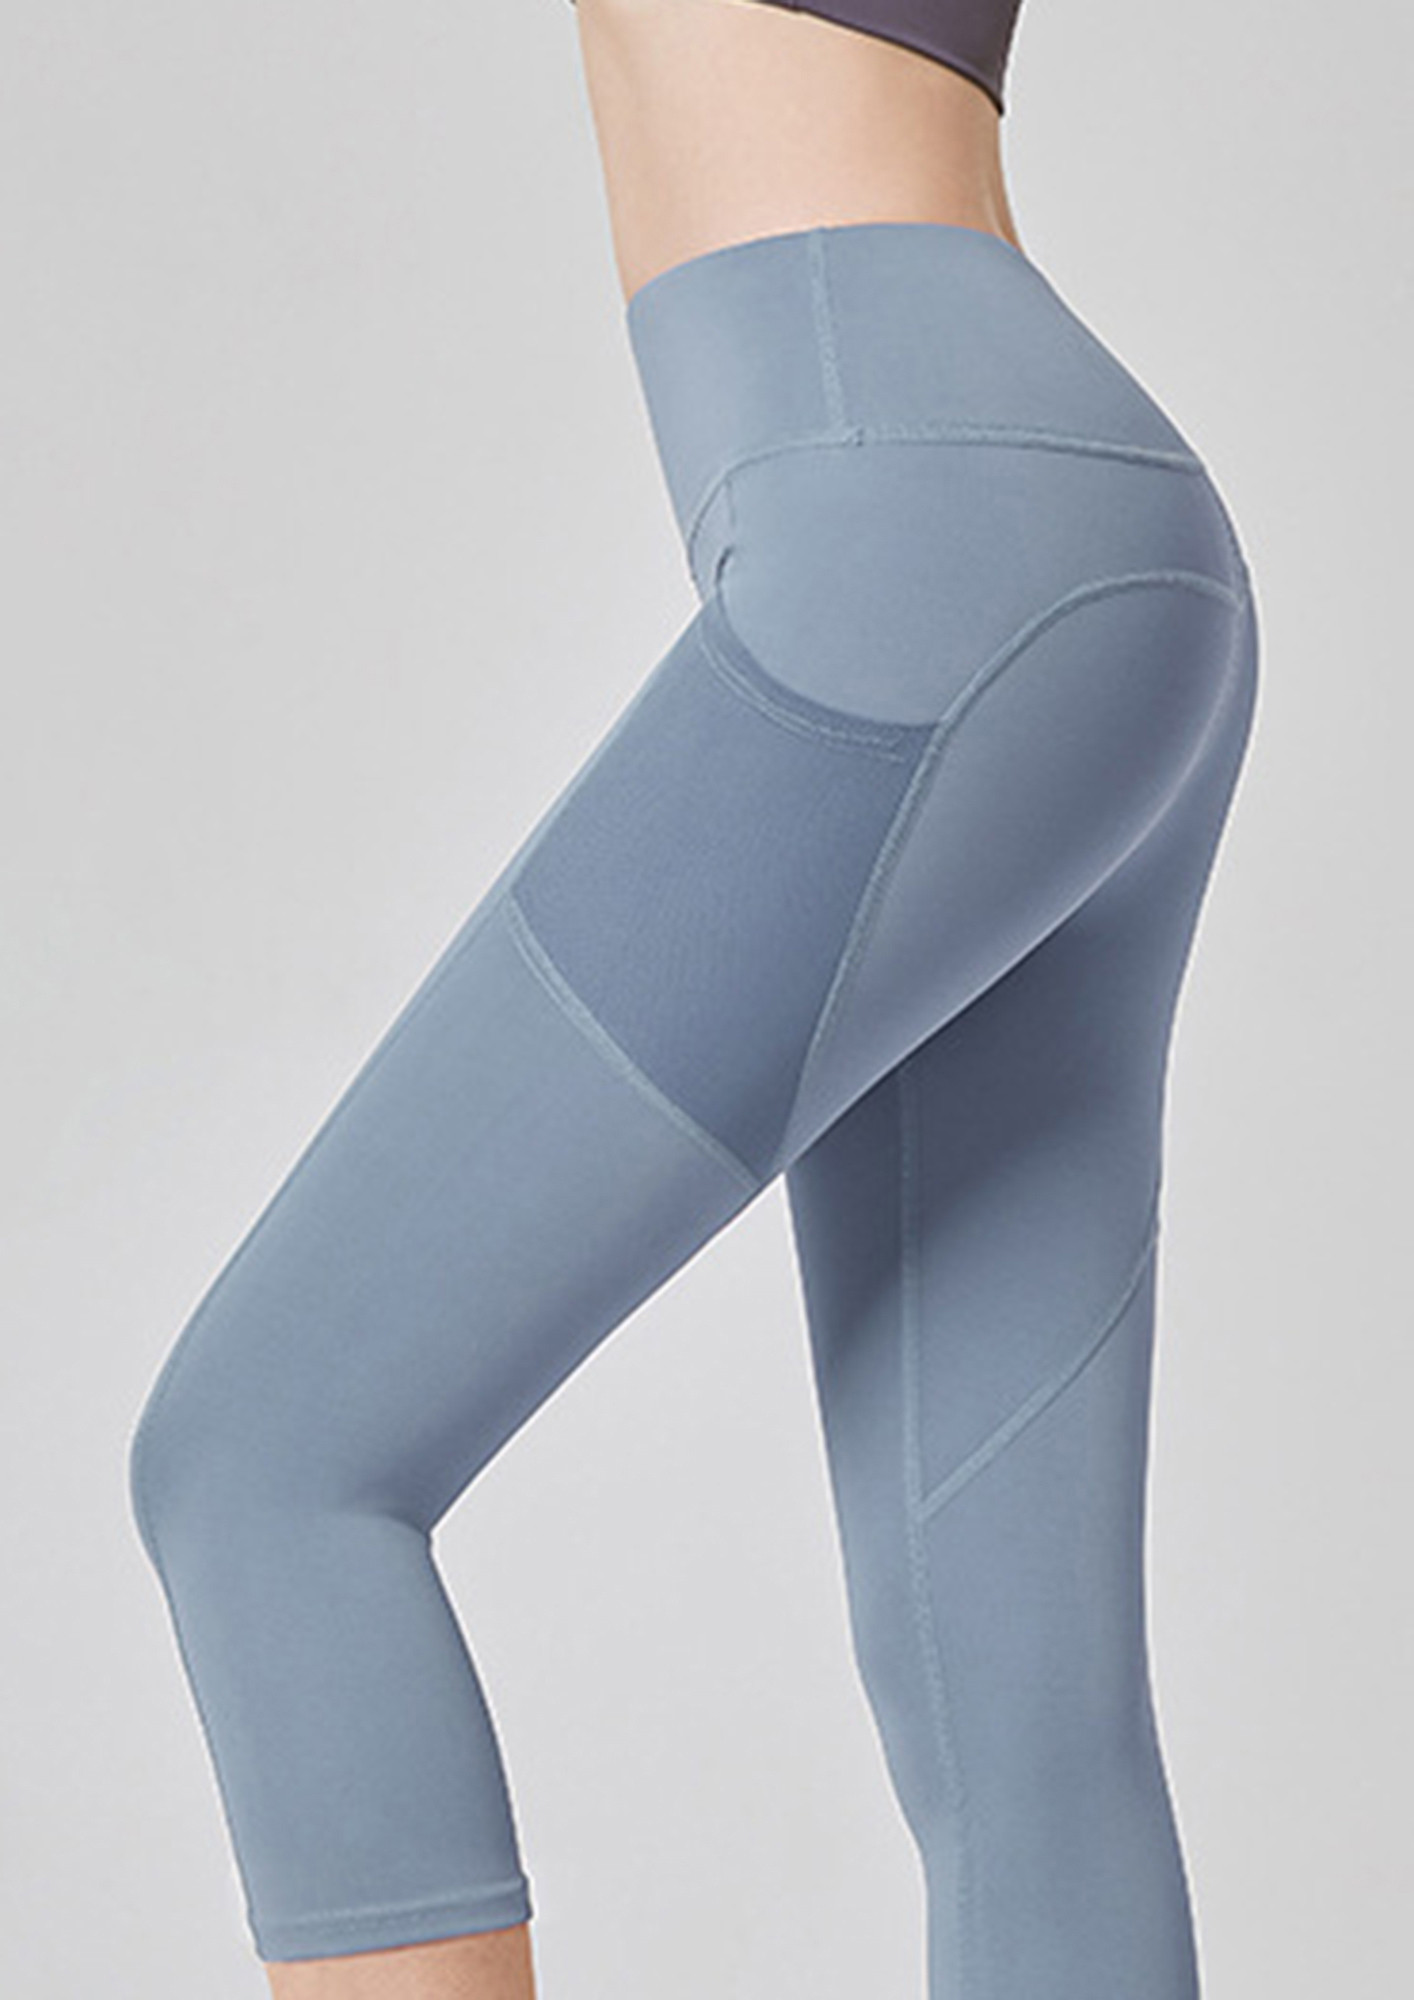 Chic Light Blue Vintage Sweat Seamless Workout Leggings For Women High  Waist, Slimming, Tight Fit Fashionable 2023 Joggers From Weeklyed, $18.67 |  DHgate.Com